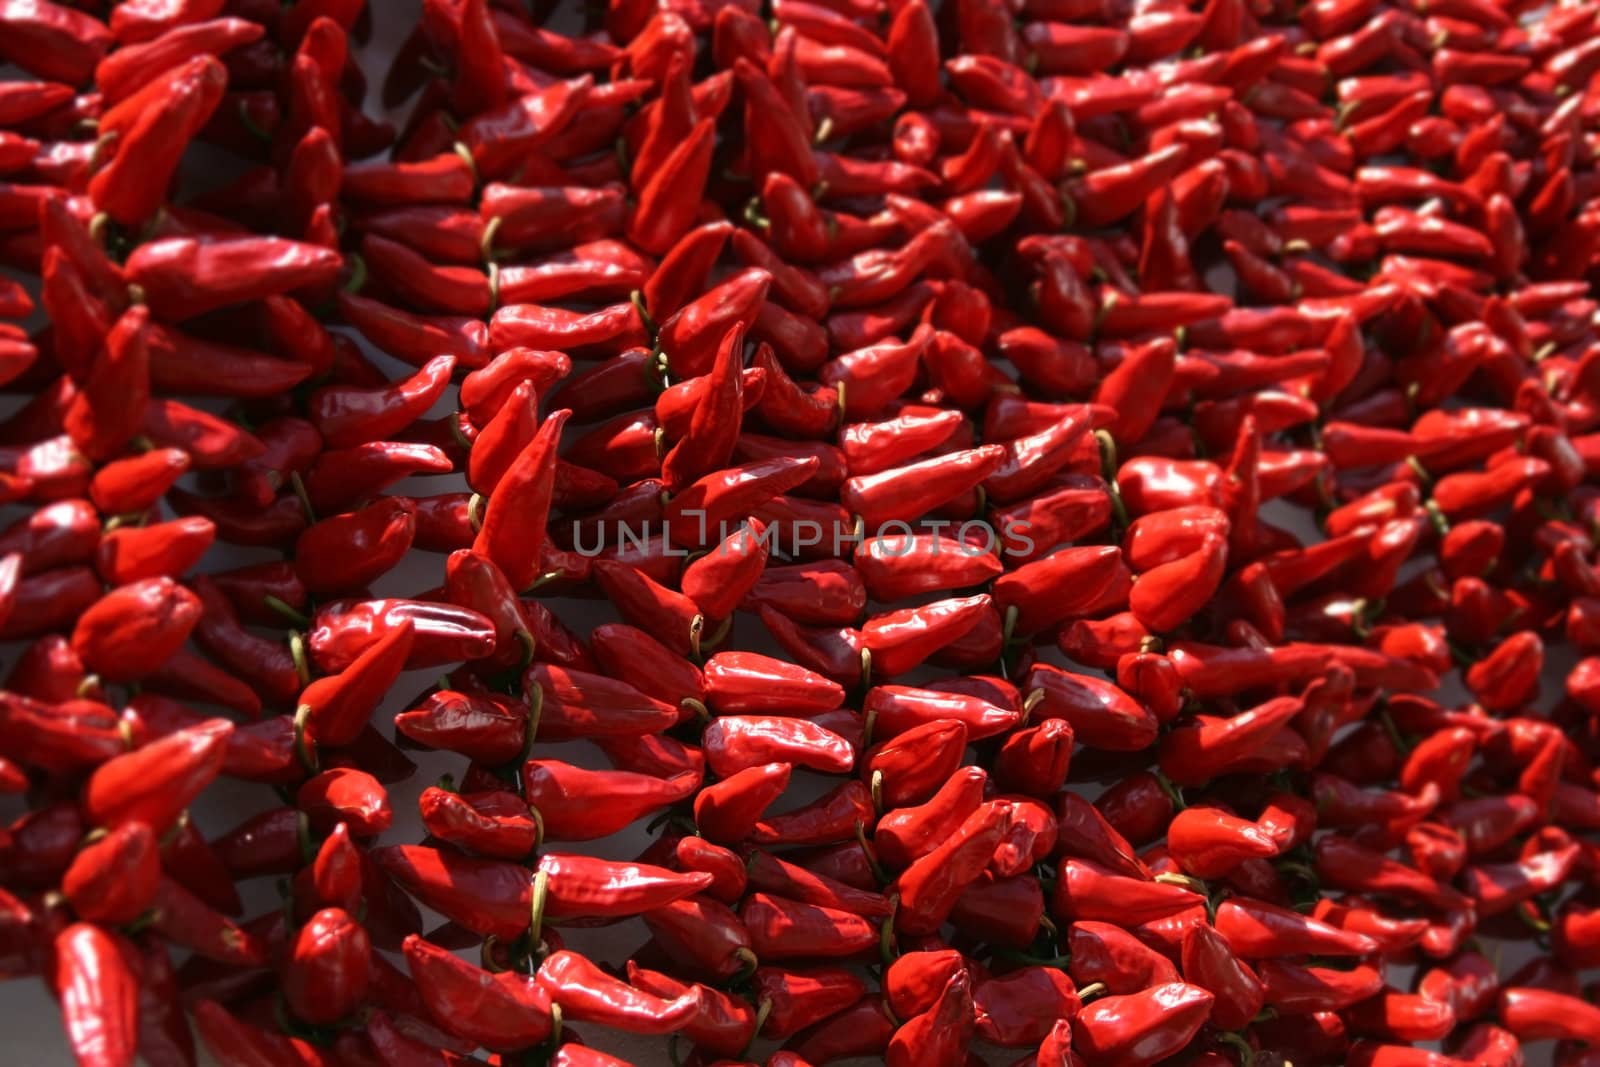 drying pepper bunches by daboost